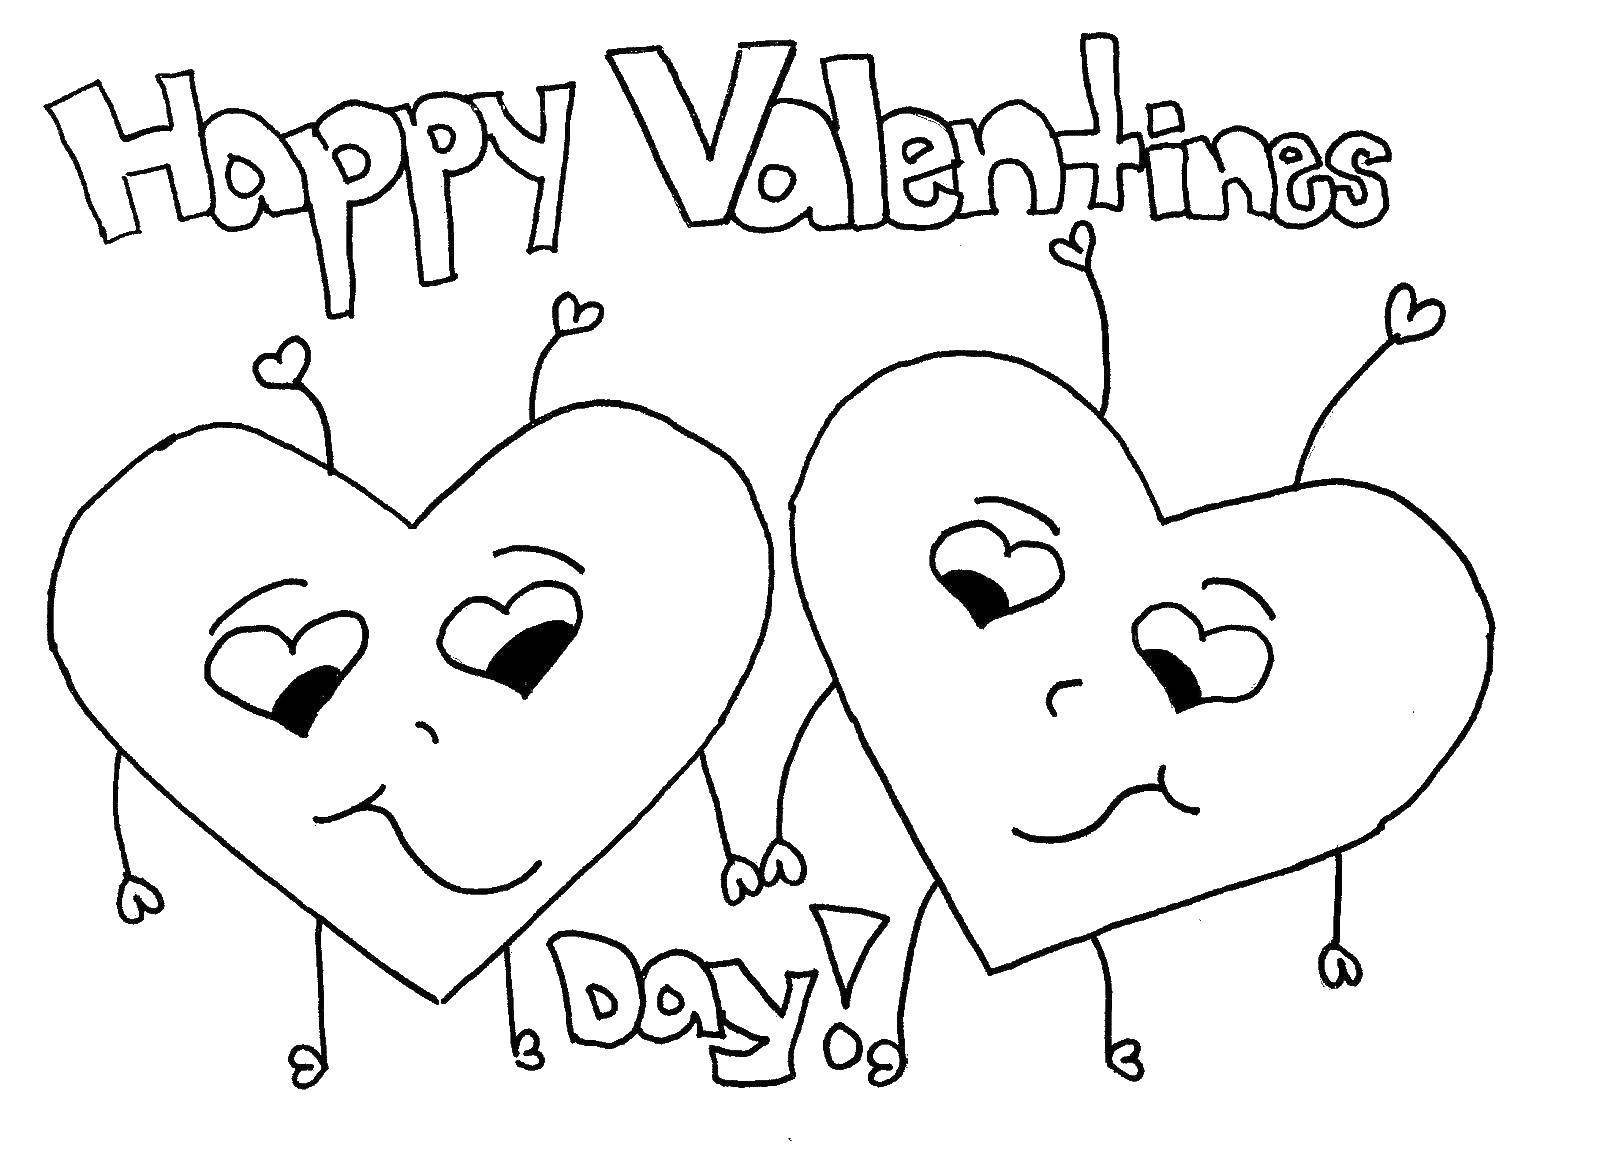 Lively 14 February coloring page